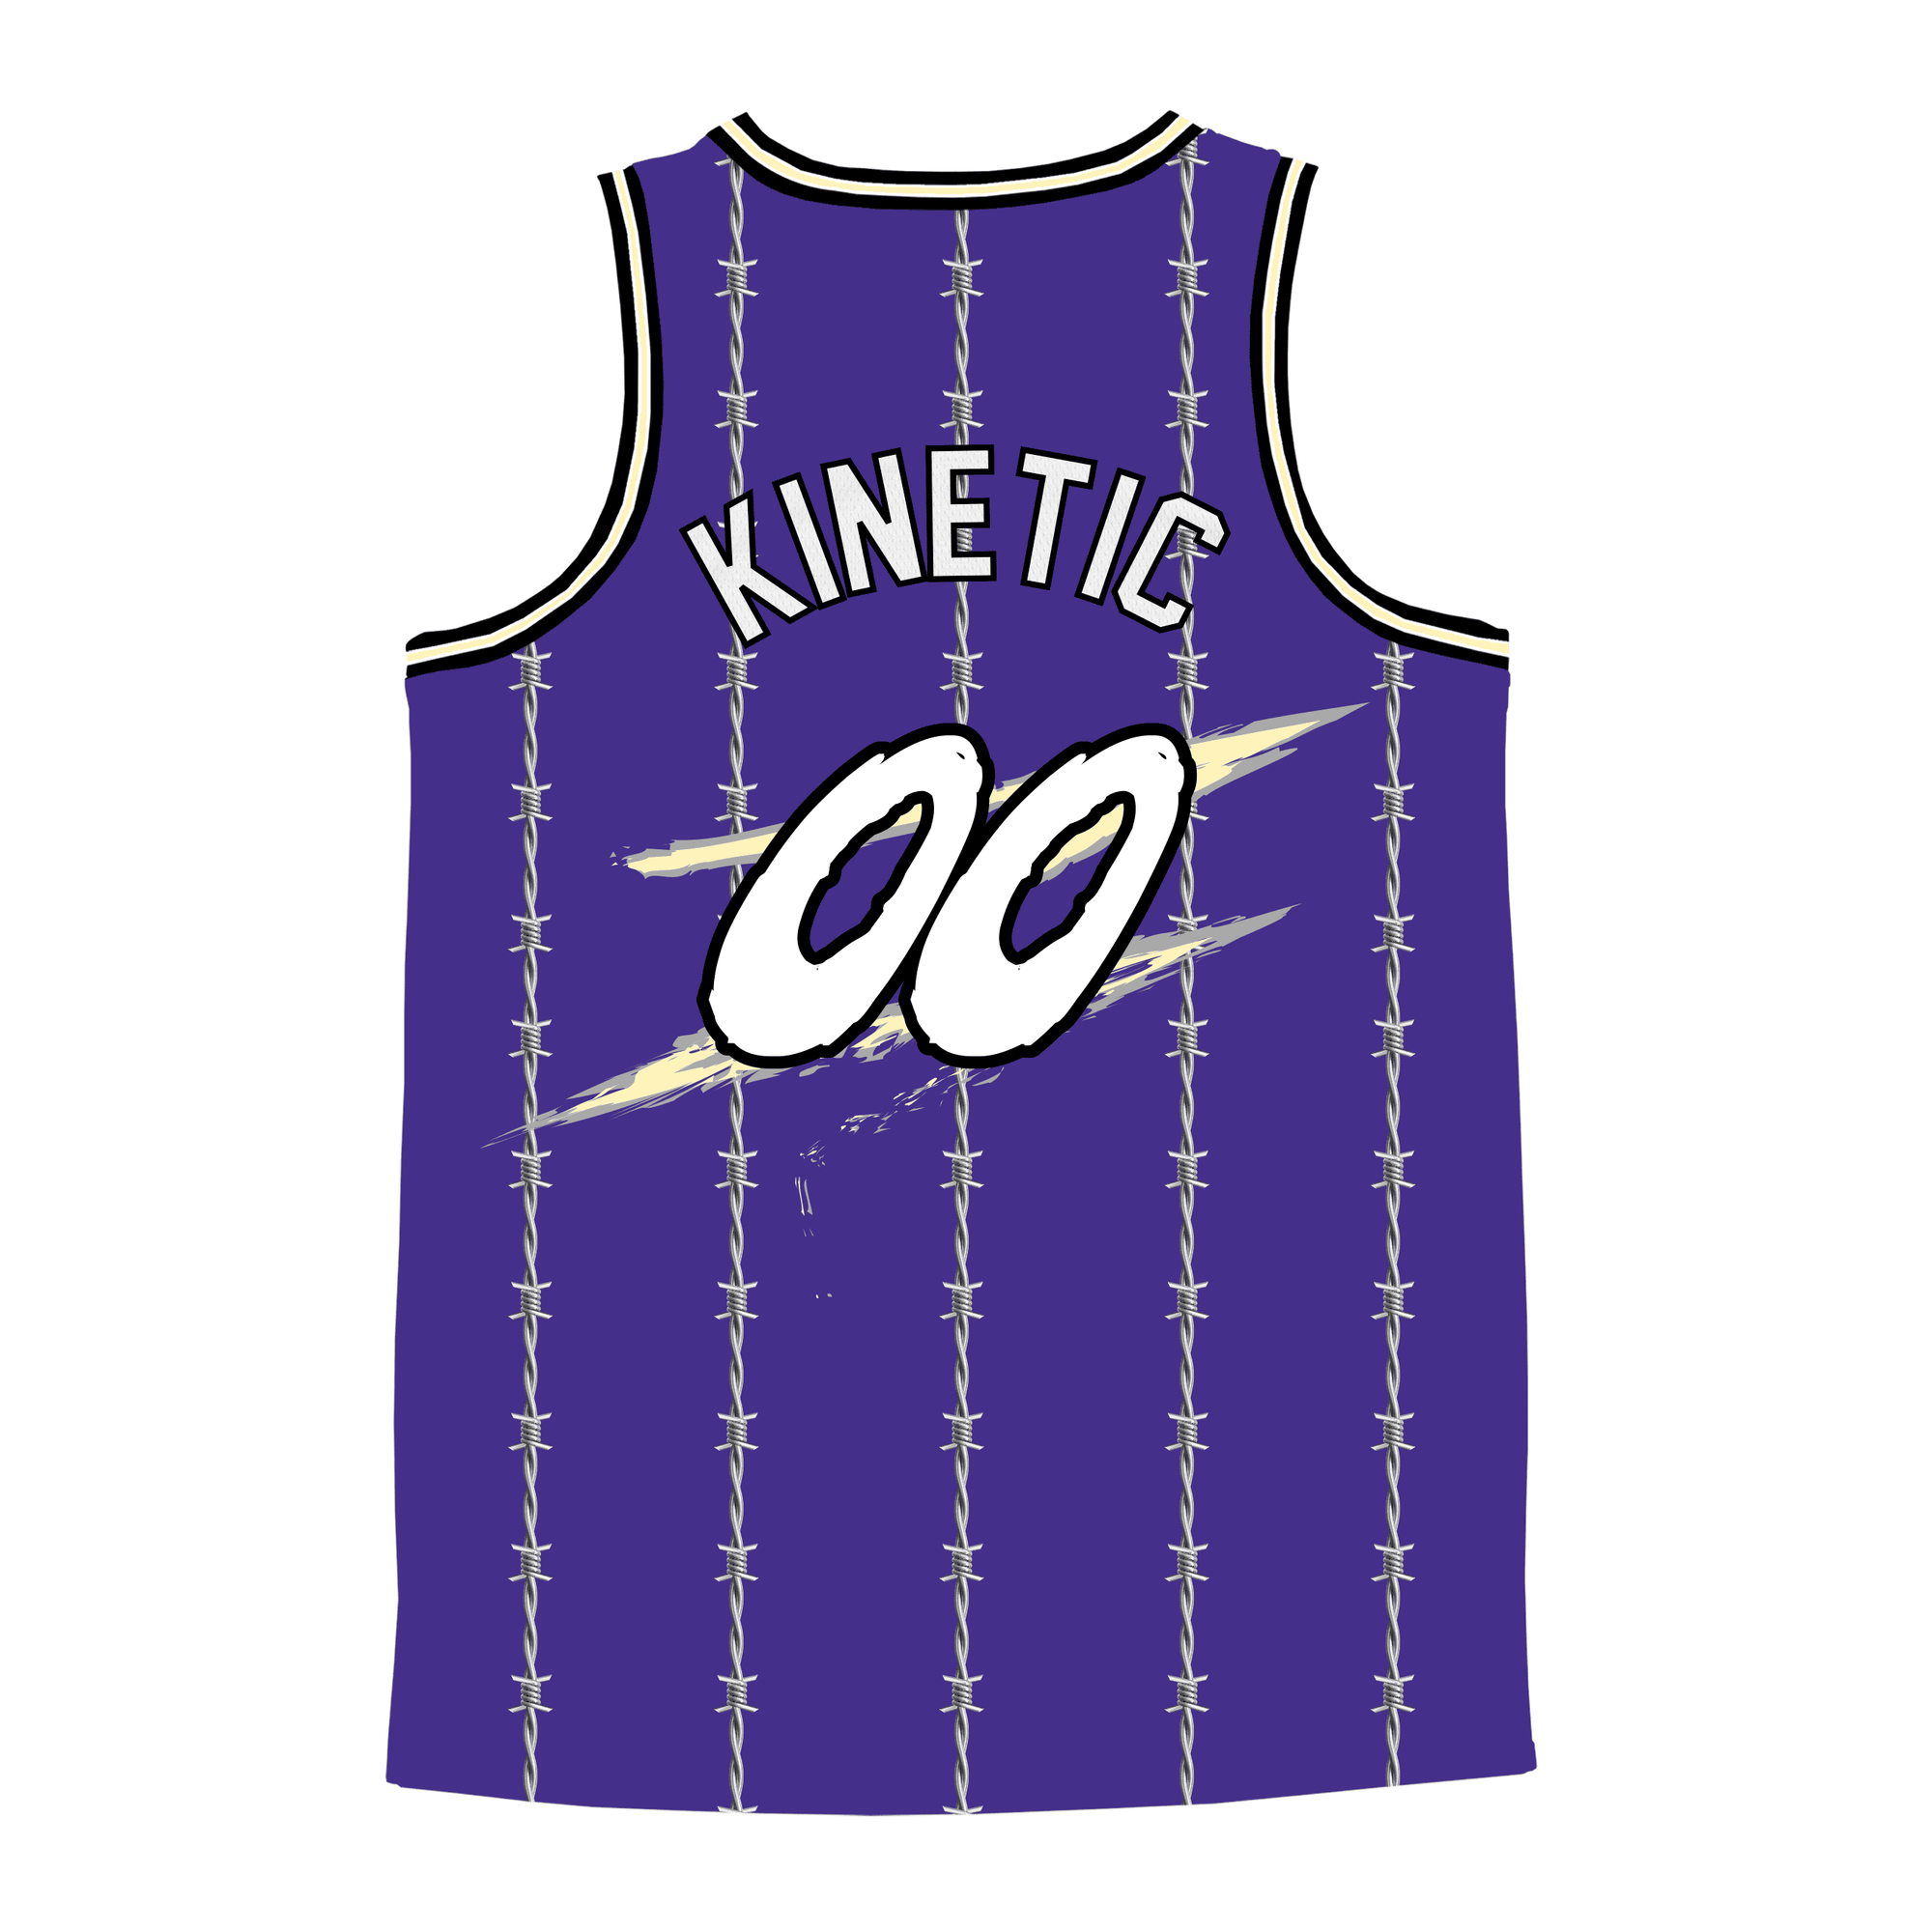 Kappa Alpha Order - Barbed Wire Basketball Jersey